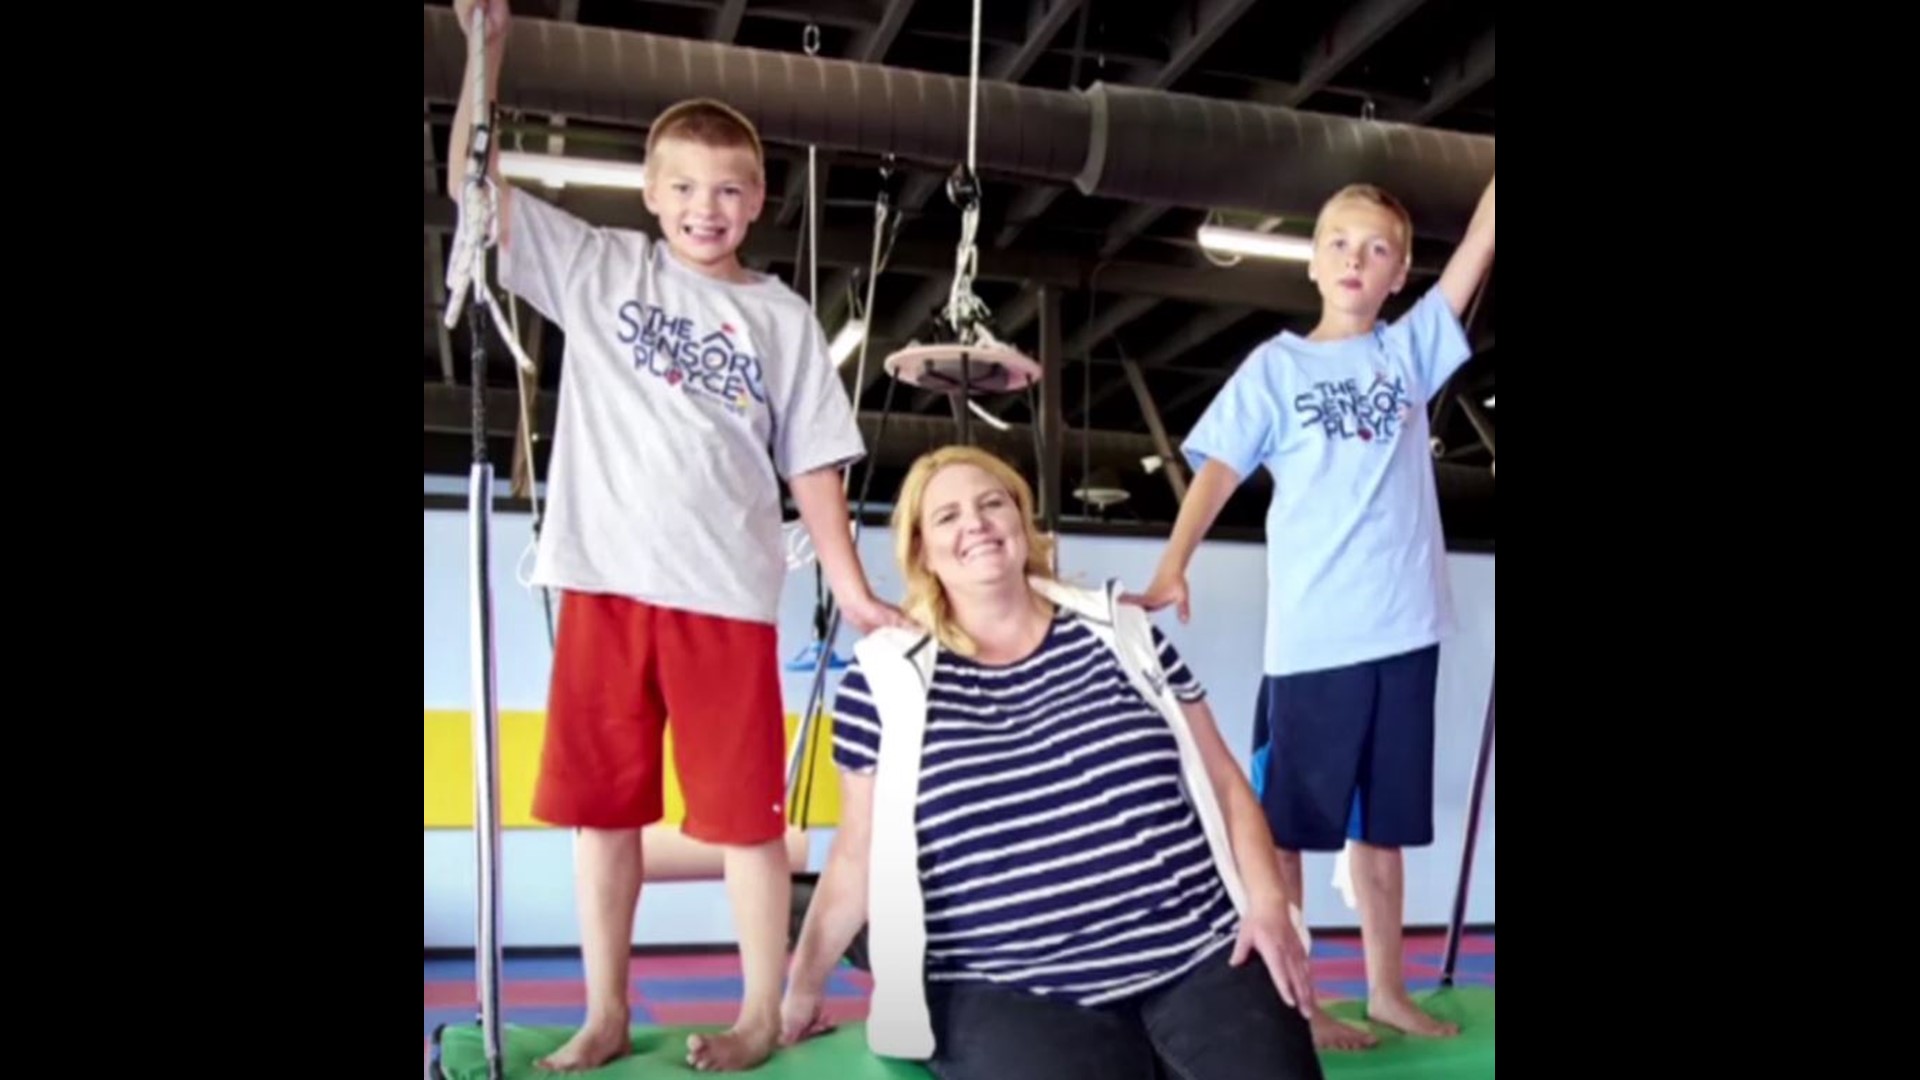 Inspired by her 10-year-old twin boys, mom Jen Johnson opened The Sensory Playce, a gym for kids with special needs and their families.